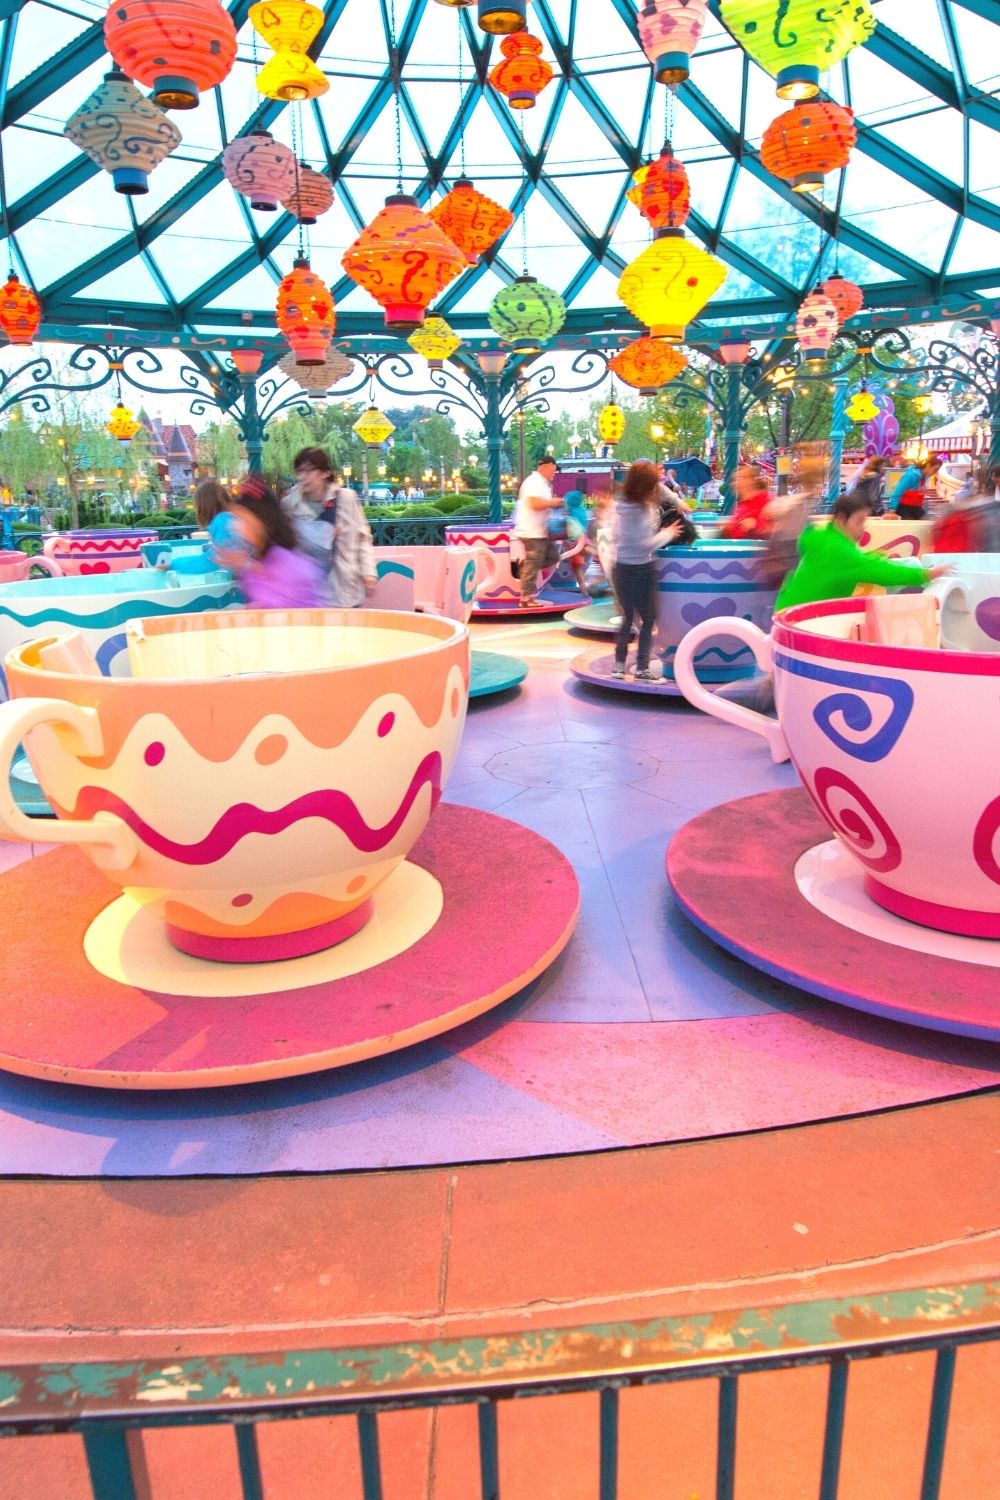 the teacup attraction at Disneyland